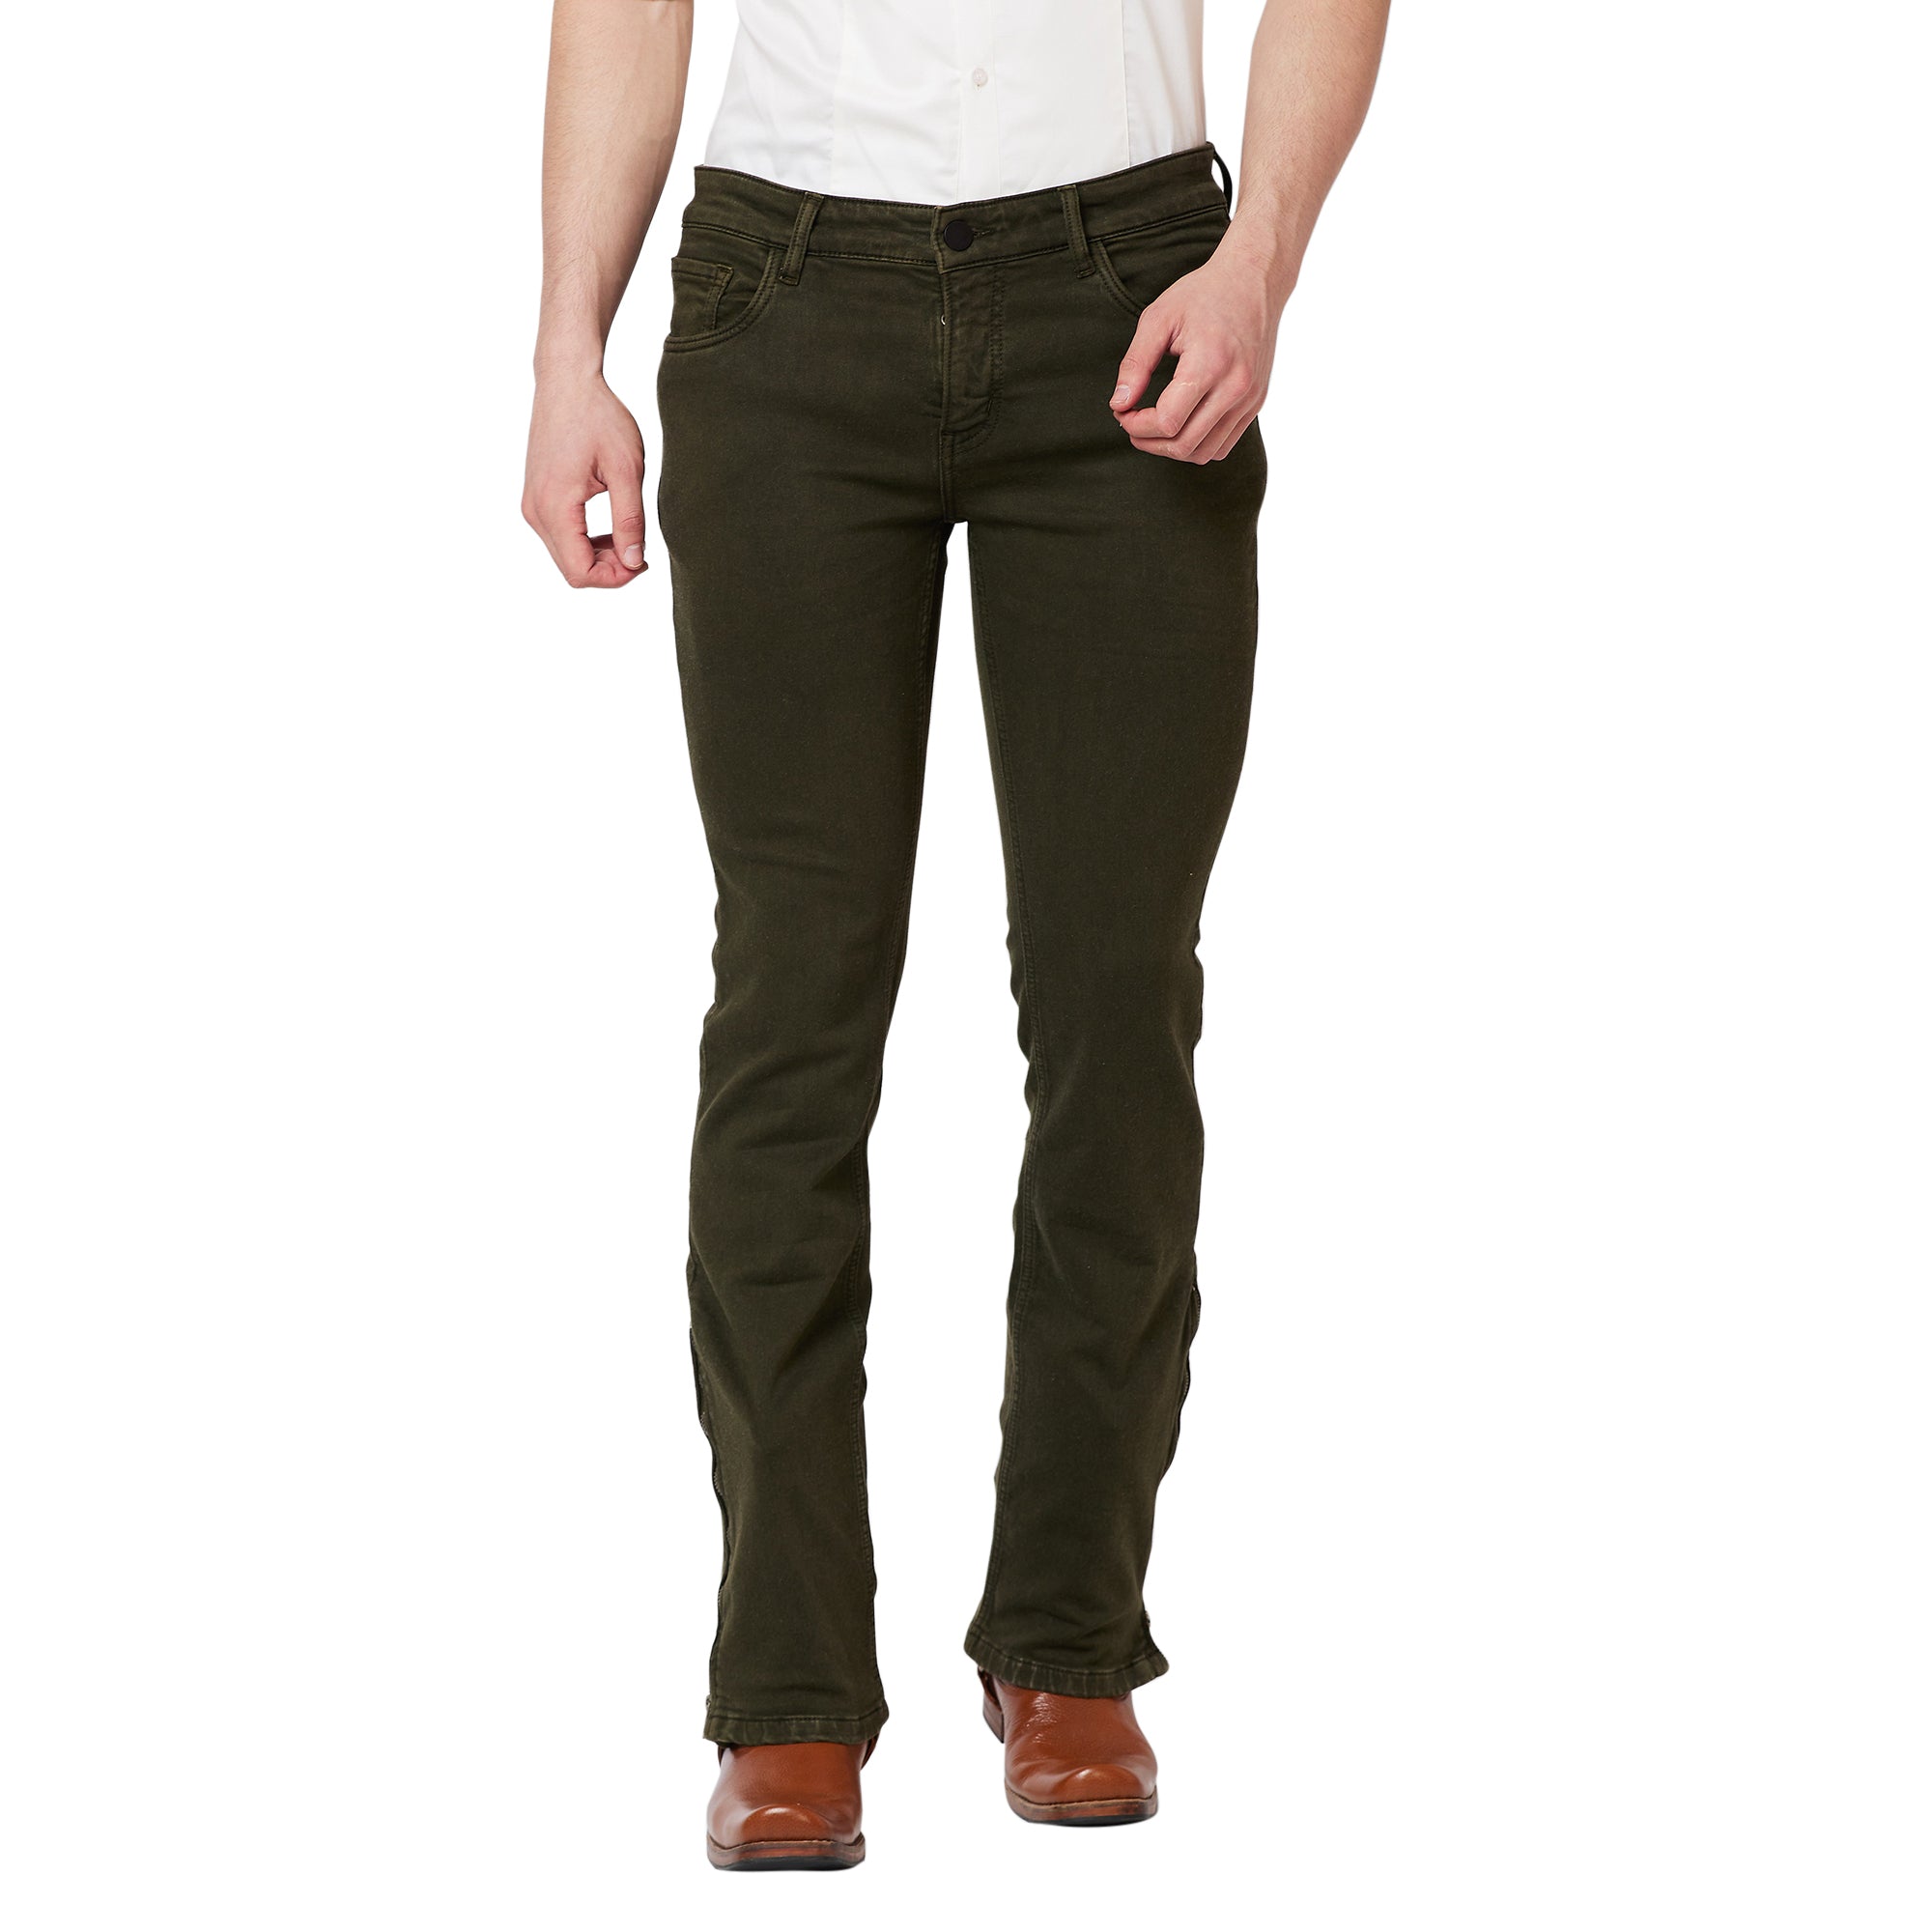 Olive Green Boot-cut Jeans With Zipper Bottom For Mens – Mode De Base ...